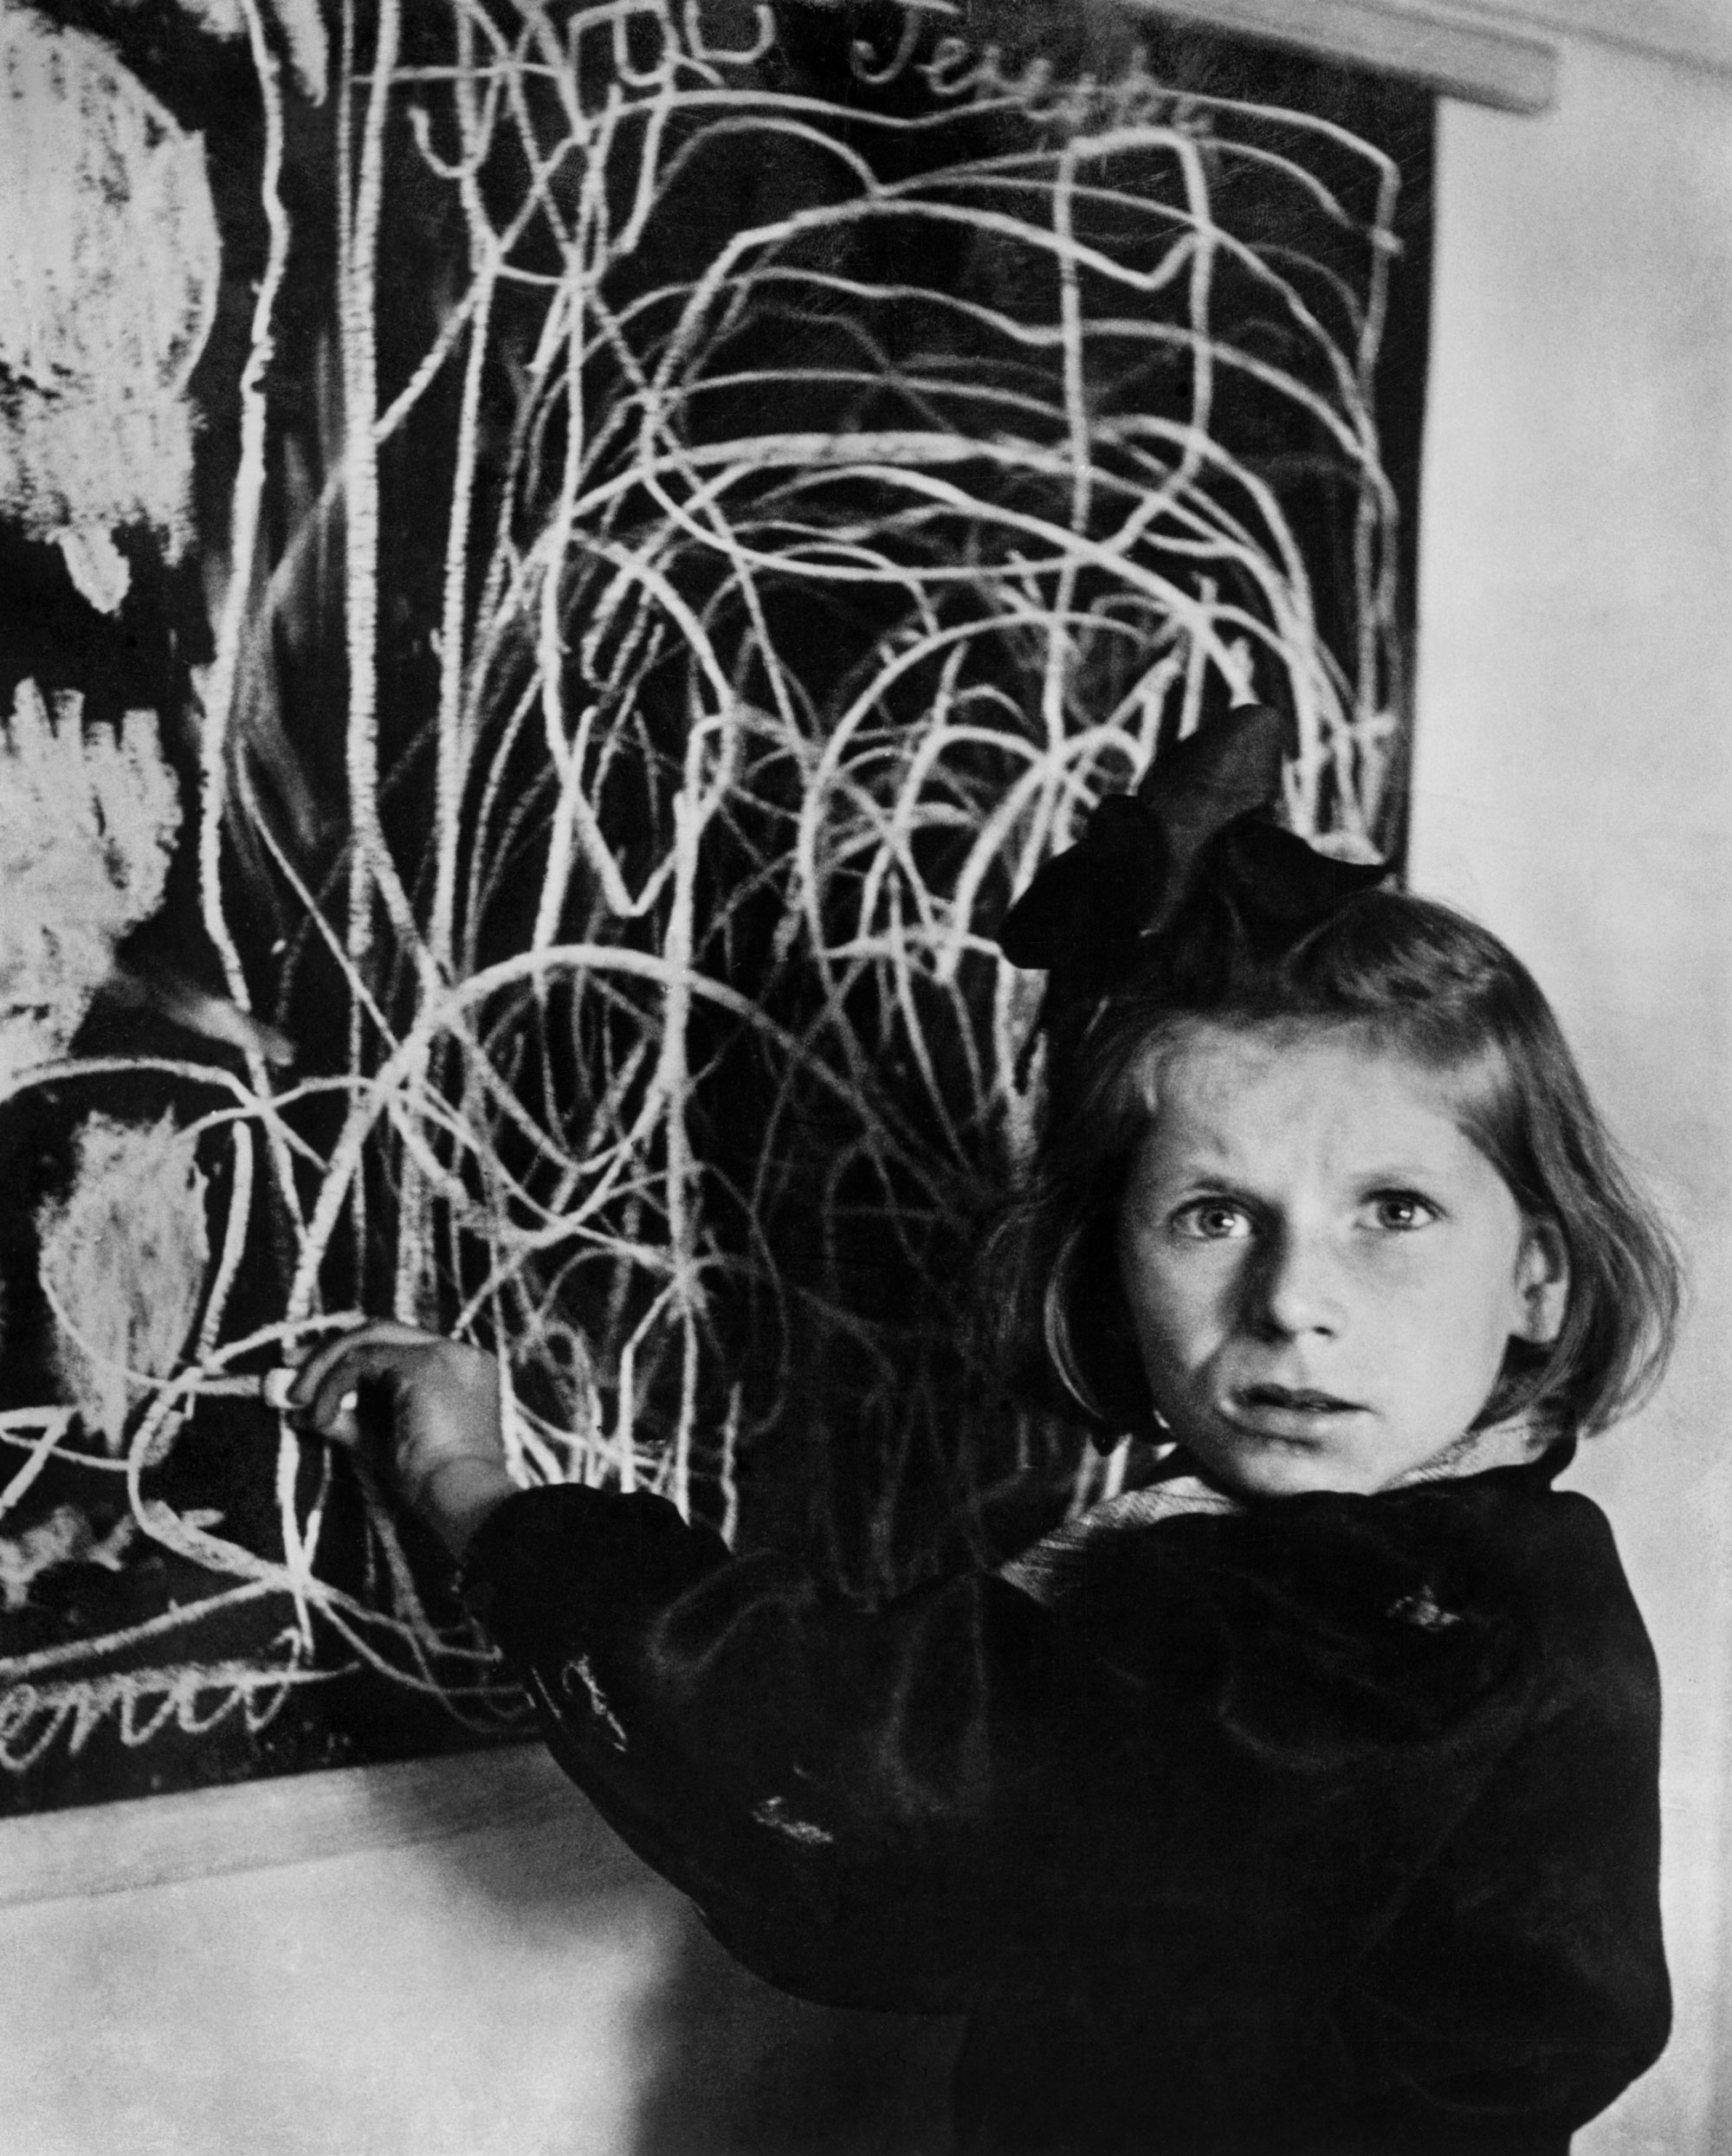 Tereska, a child in a residence for disturbed children. She drew a picture of "home" on the blackboard. Warsaw, 1948.